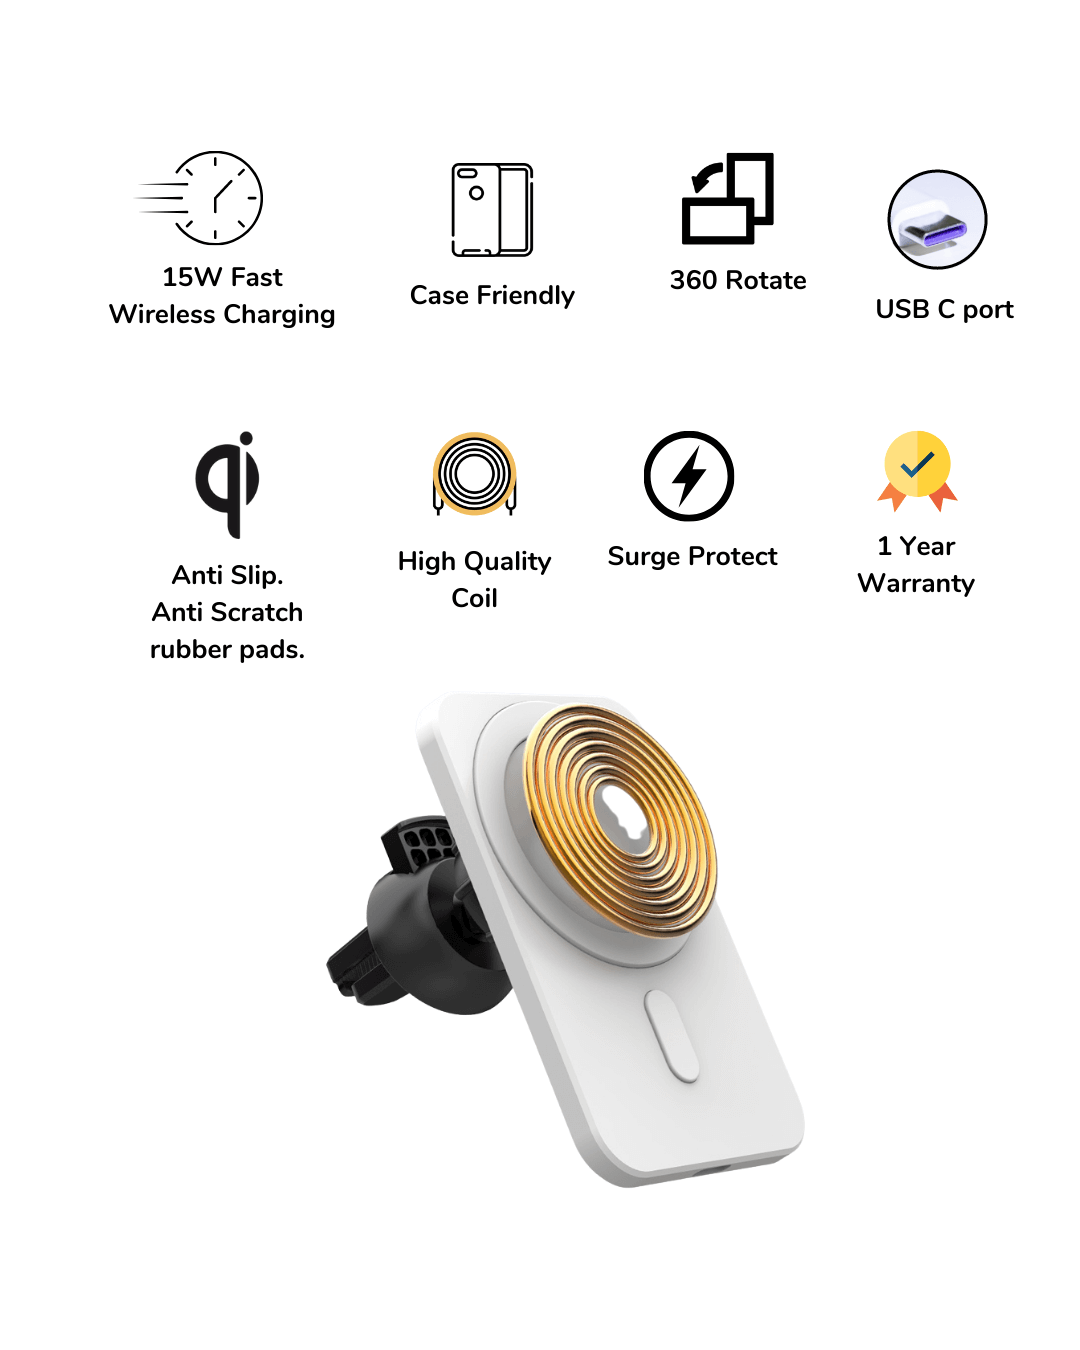 MagCharge 300 Wireless Mag-Safe Car Charger